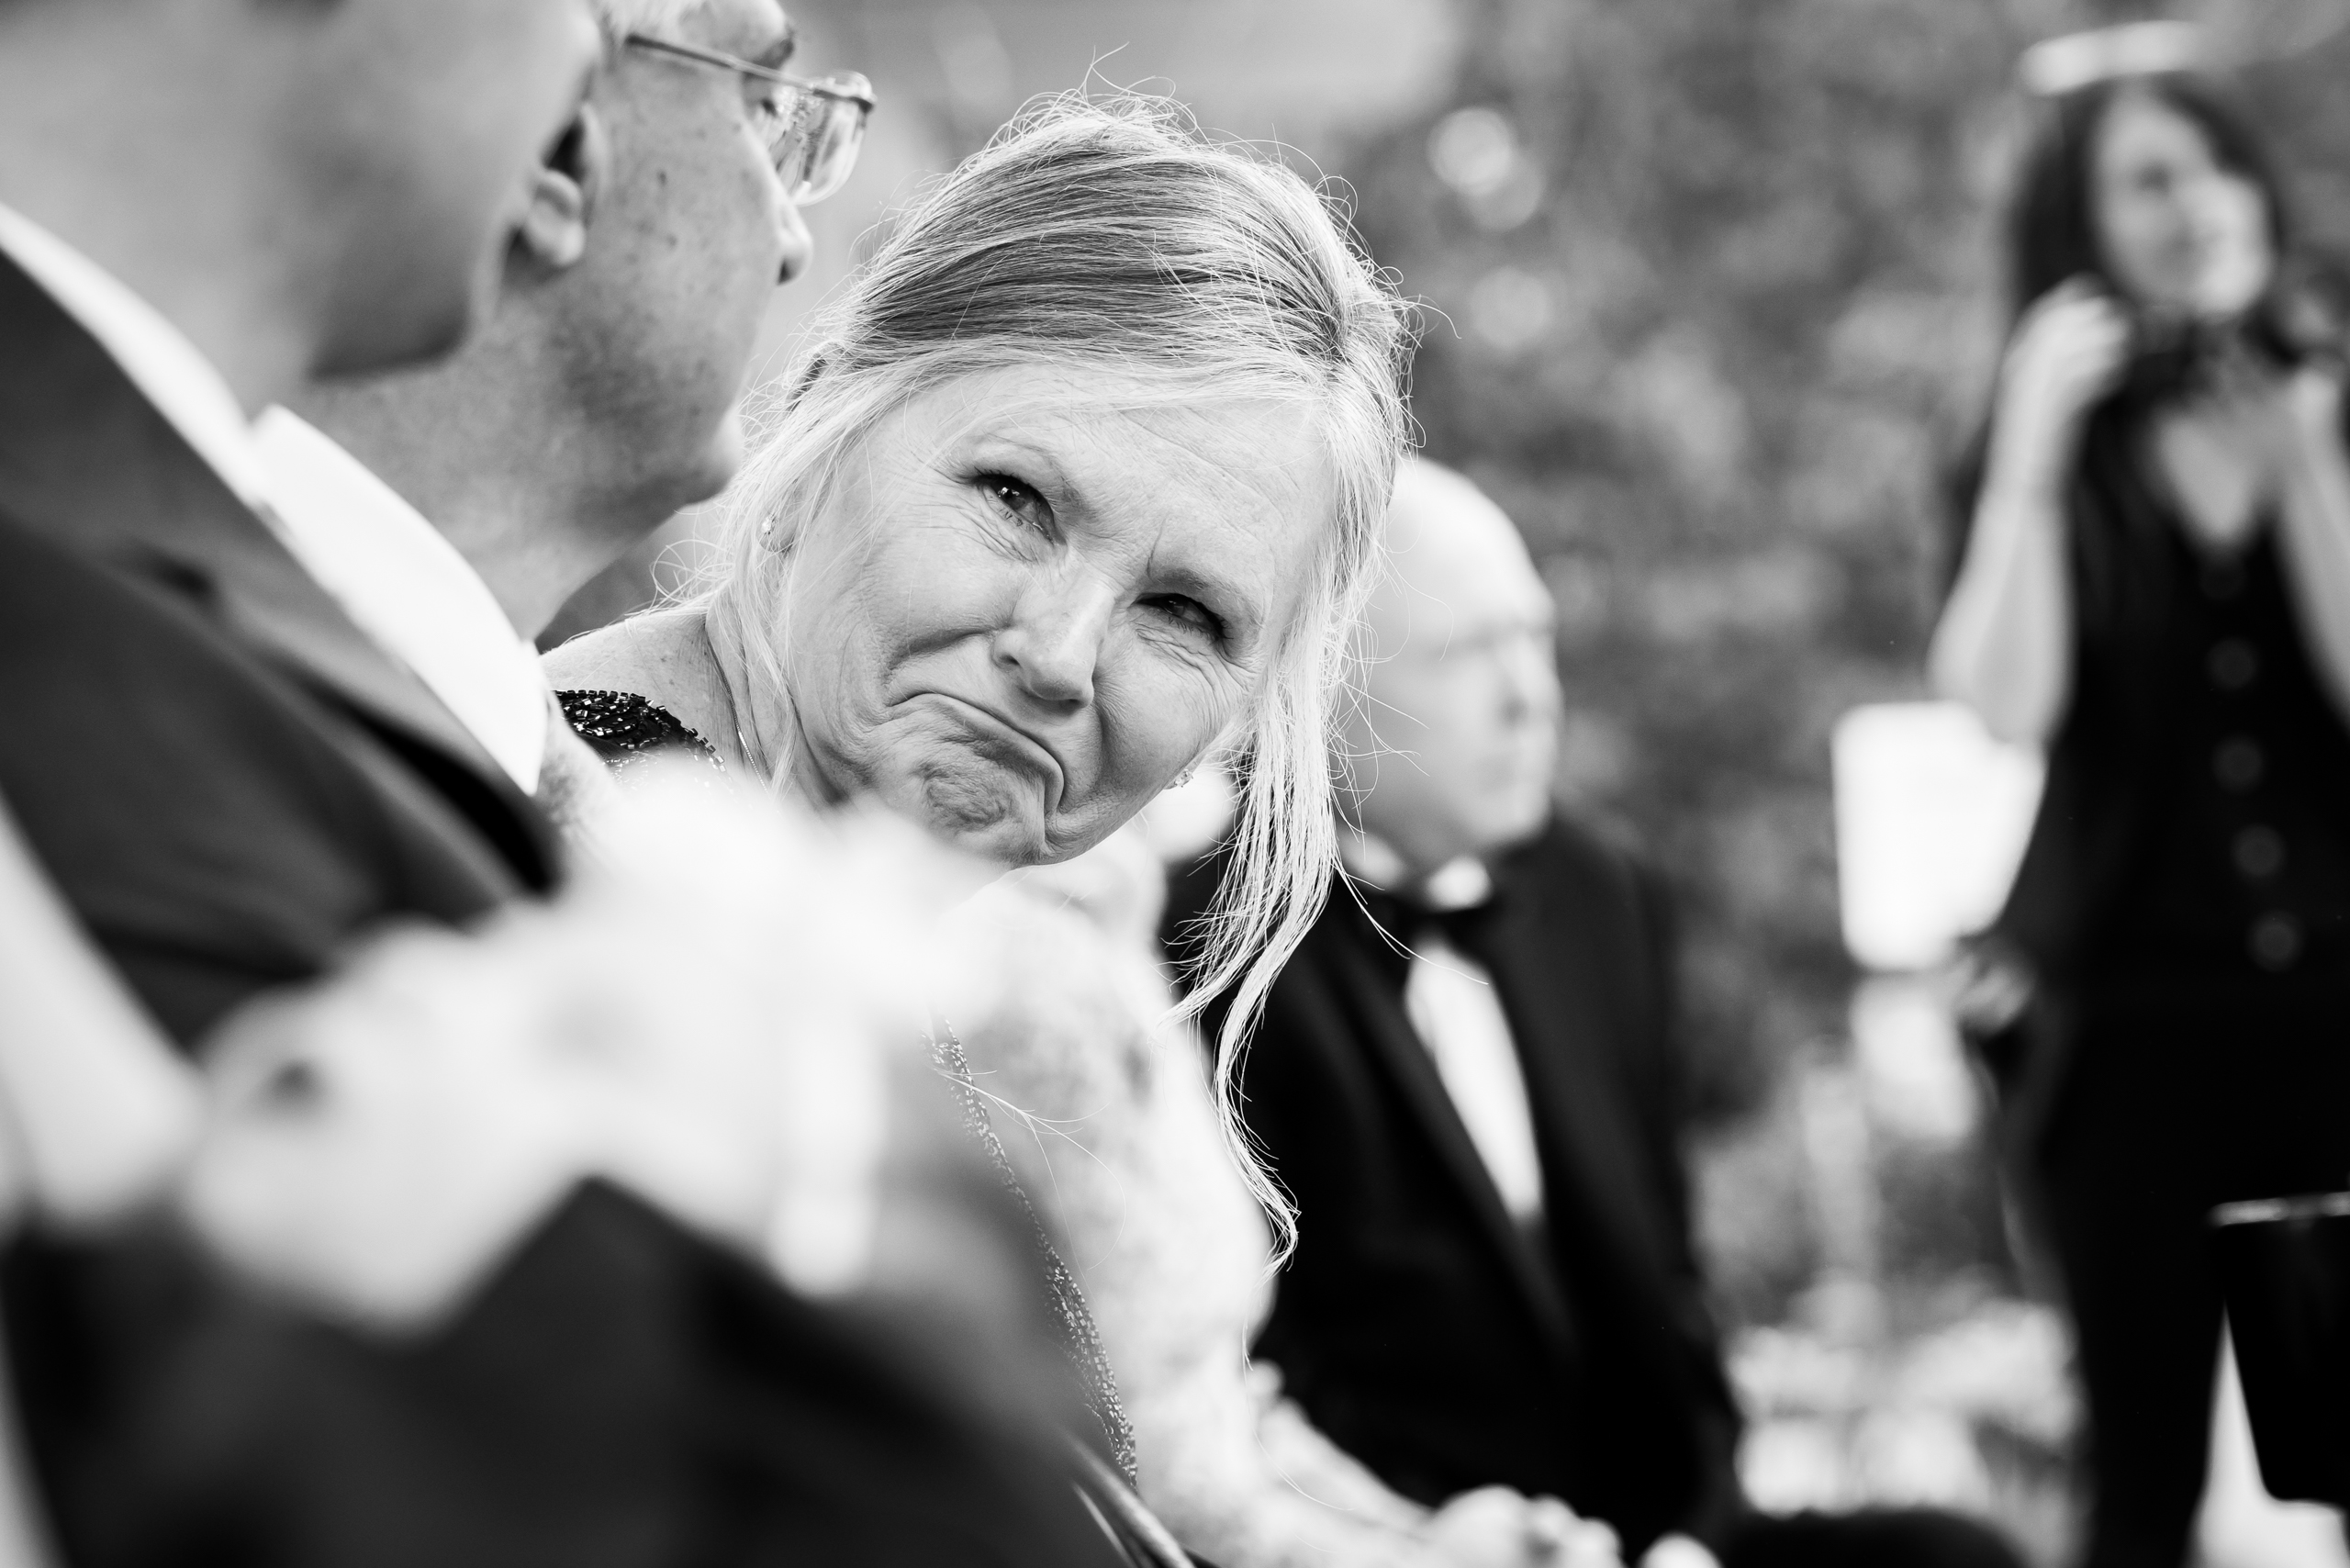 Mother of the groom reacts emotionally as the bride reads her vows aloud during their wedding ceremony, wedding photos, wedding photography, wedding photographer, wedding photo inspiration, Denver Botanic Garden wedding, Denver Botanic Garden wedding photos, Denver Botanic Garden wedding photography, Denver Botanic Garden wedding inspiration, Denver wedding venue, Denver wedding photos, Denver wedding photography, Denver wedding photographer, Colorado wedding photography